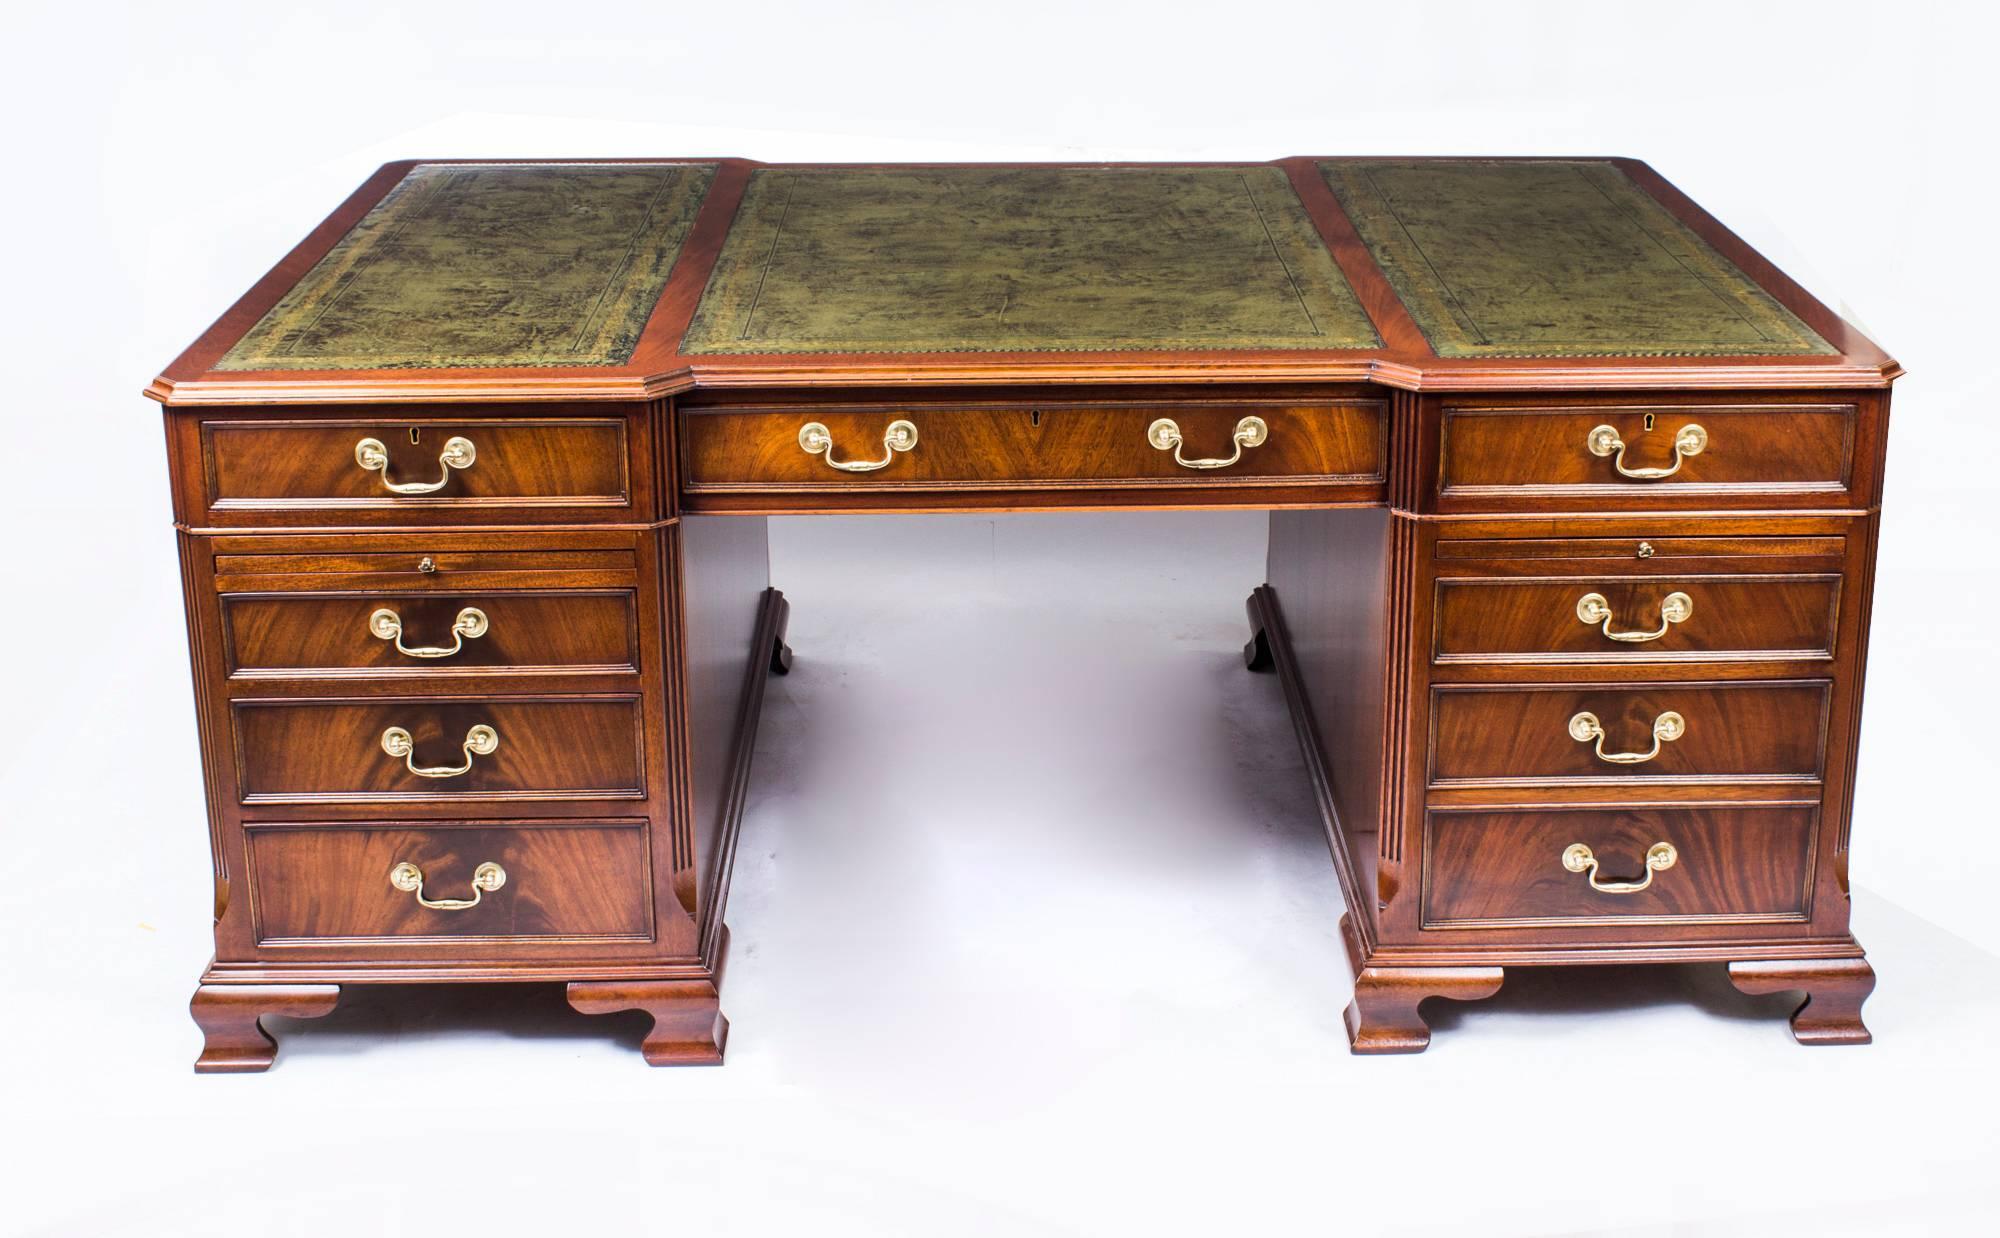 This is a stunning large vintage Georgian style partner’s desk, masterfully crafted in flame mahogany, dating from the second half of the 20th century.

The desk top has a beautiful three part green gilt tooled leather writing surface and it is